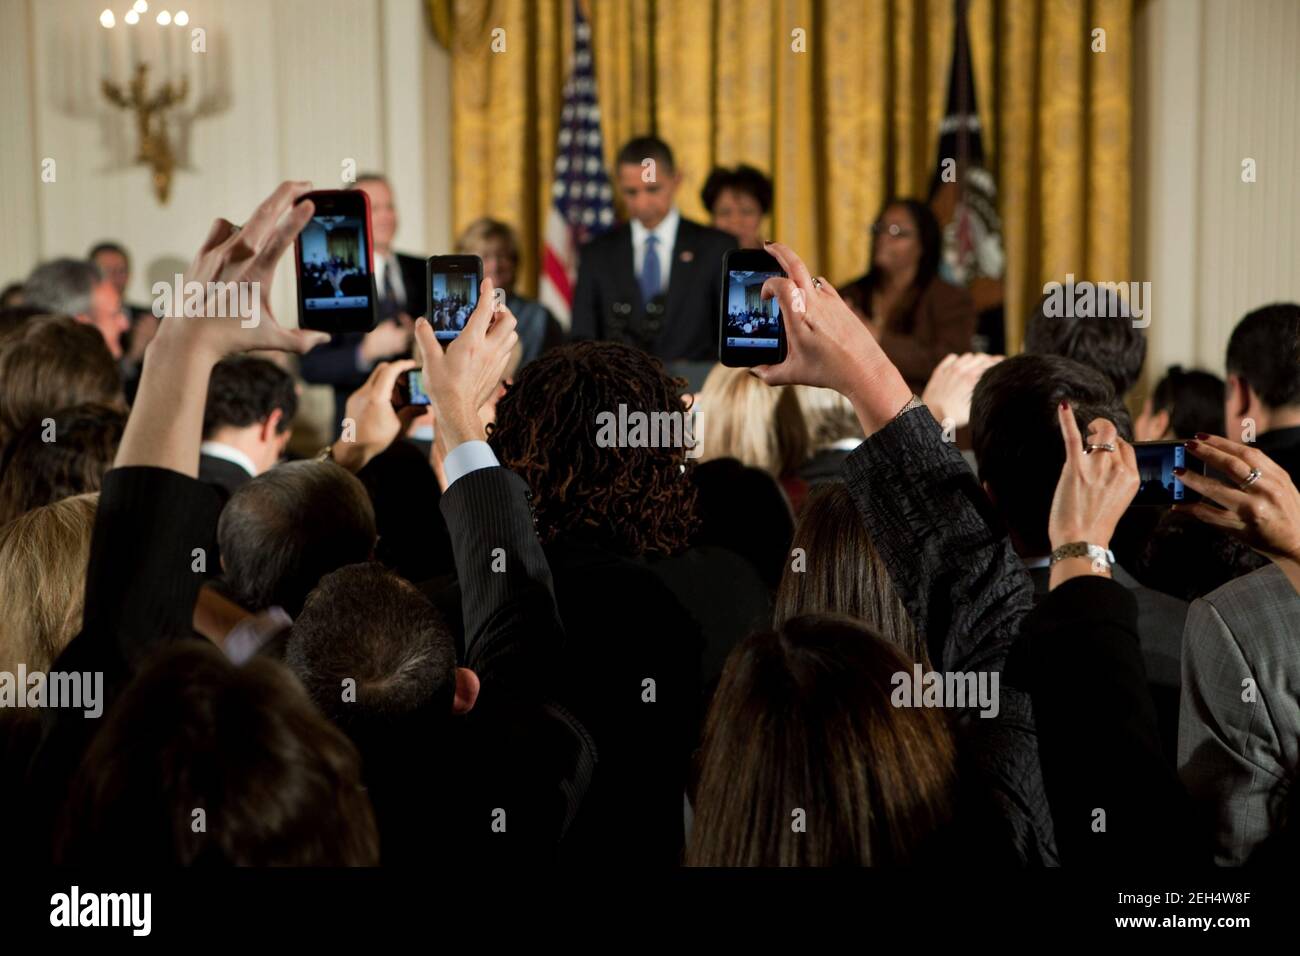 Guests take pictures during a reception commemorating the enactment of the Matthew Shepard and James Byrd Jr. Hate Crimes Prevention Act, in the East Room of the White House, Oct. 28, 2009. Stock Photo